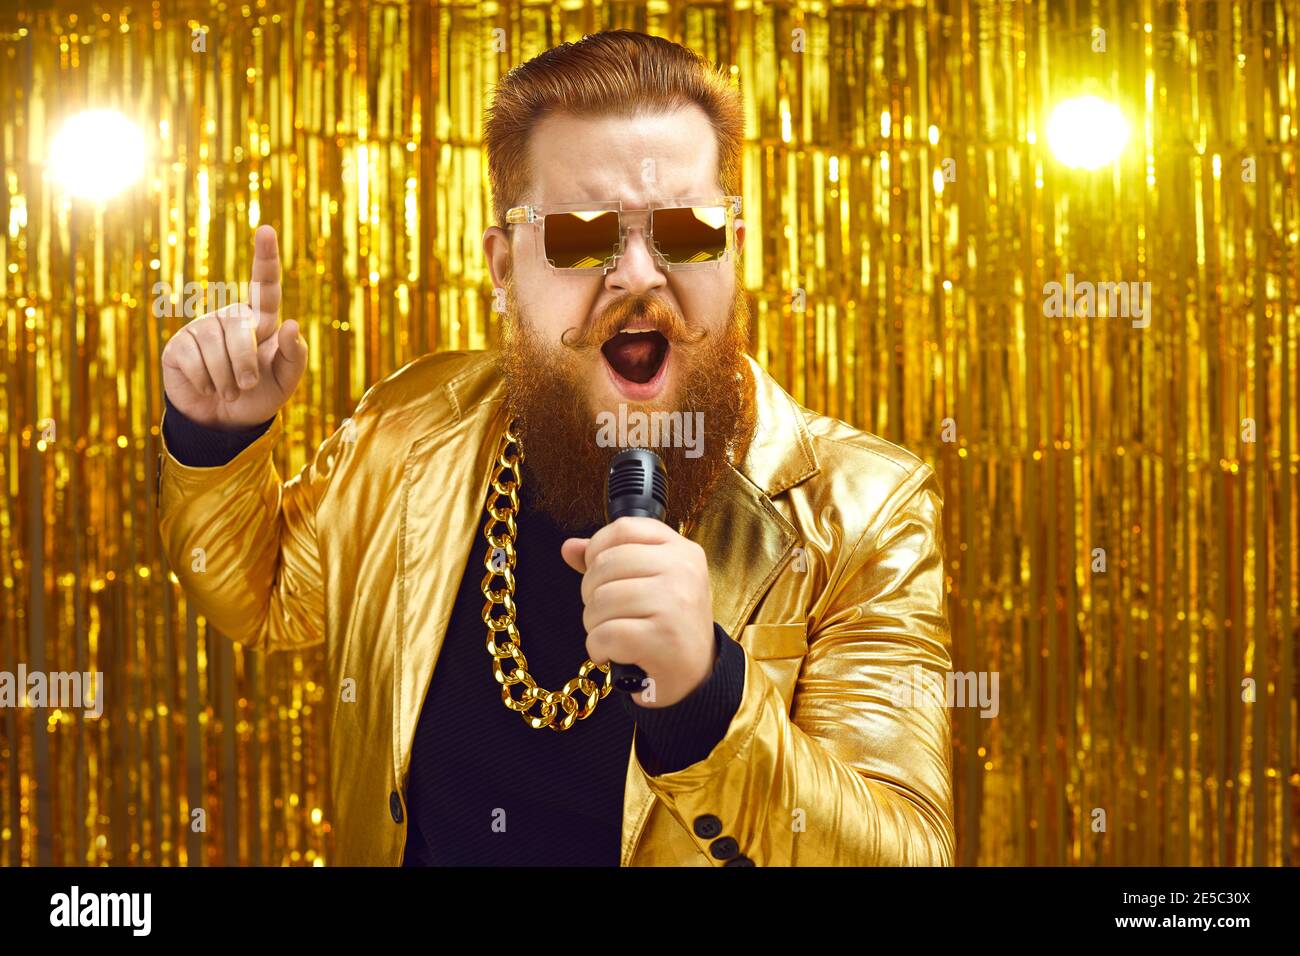 Singer in golden jacket and gold chain holding mic and singing songs at retro music concert Stock Photo